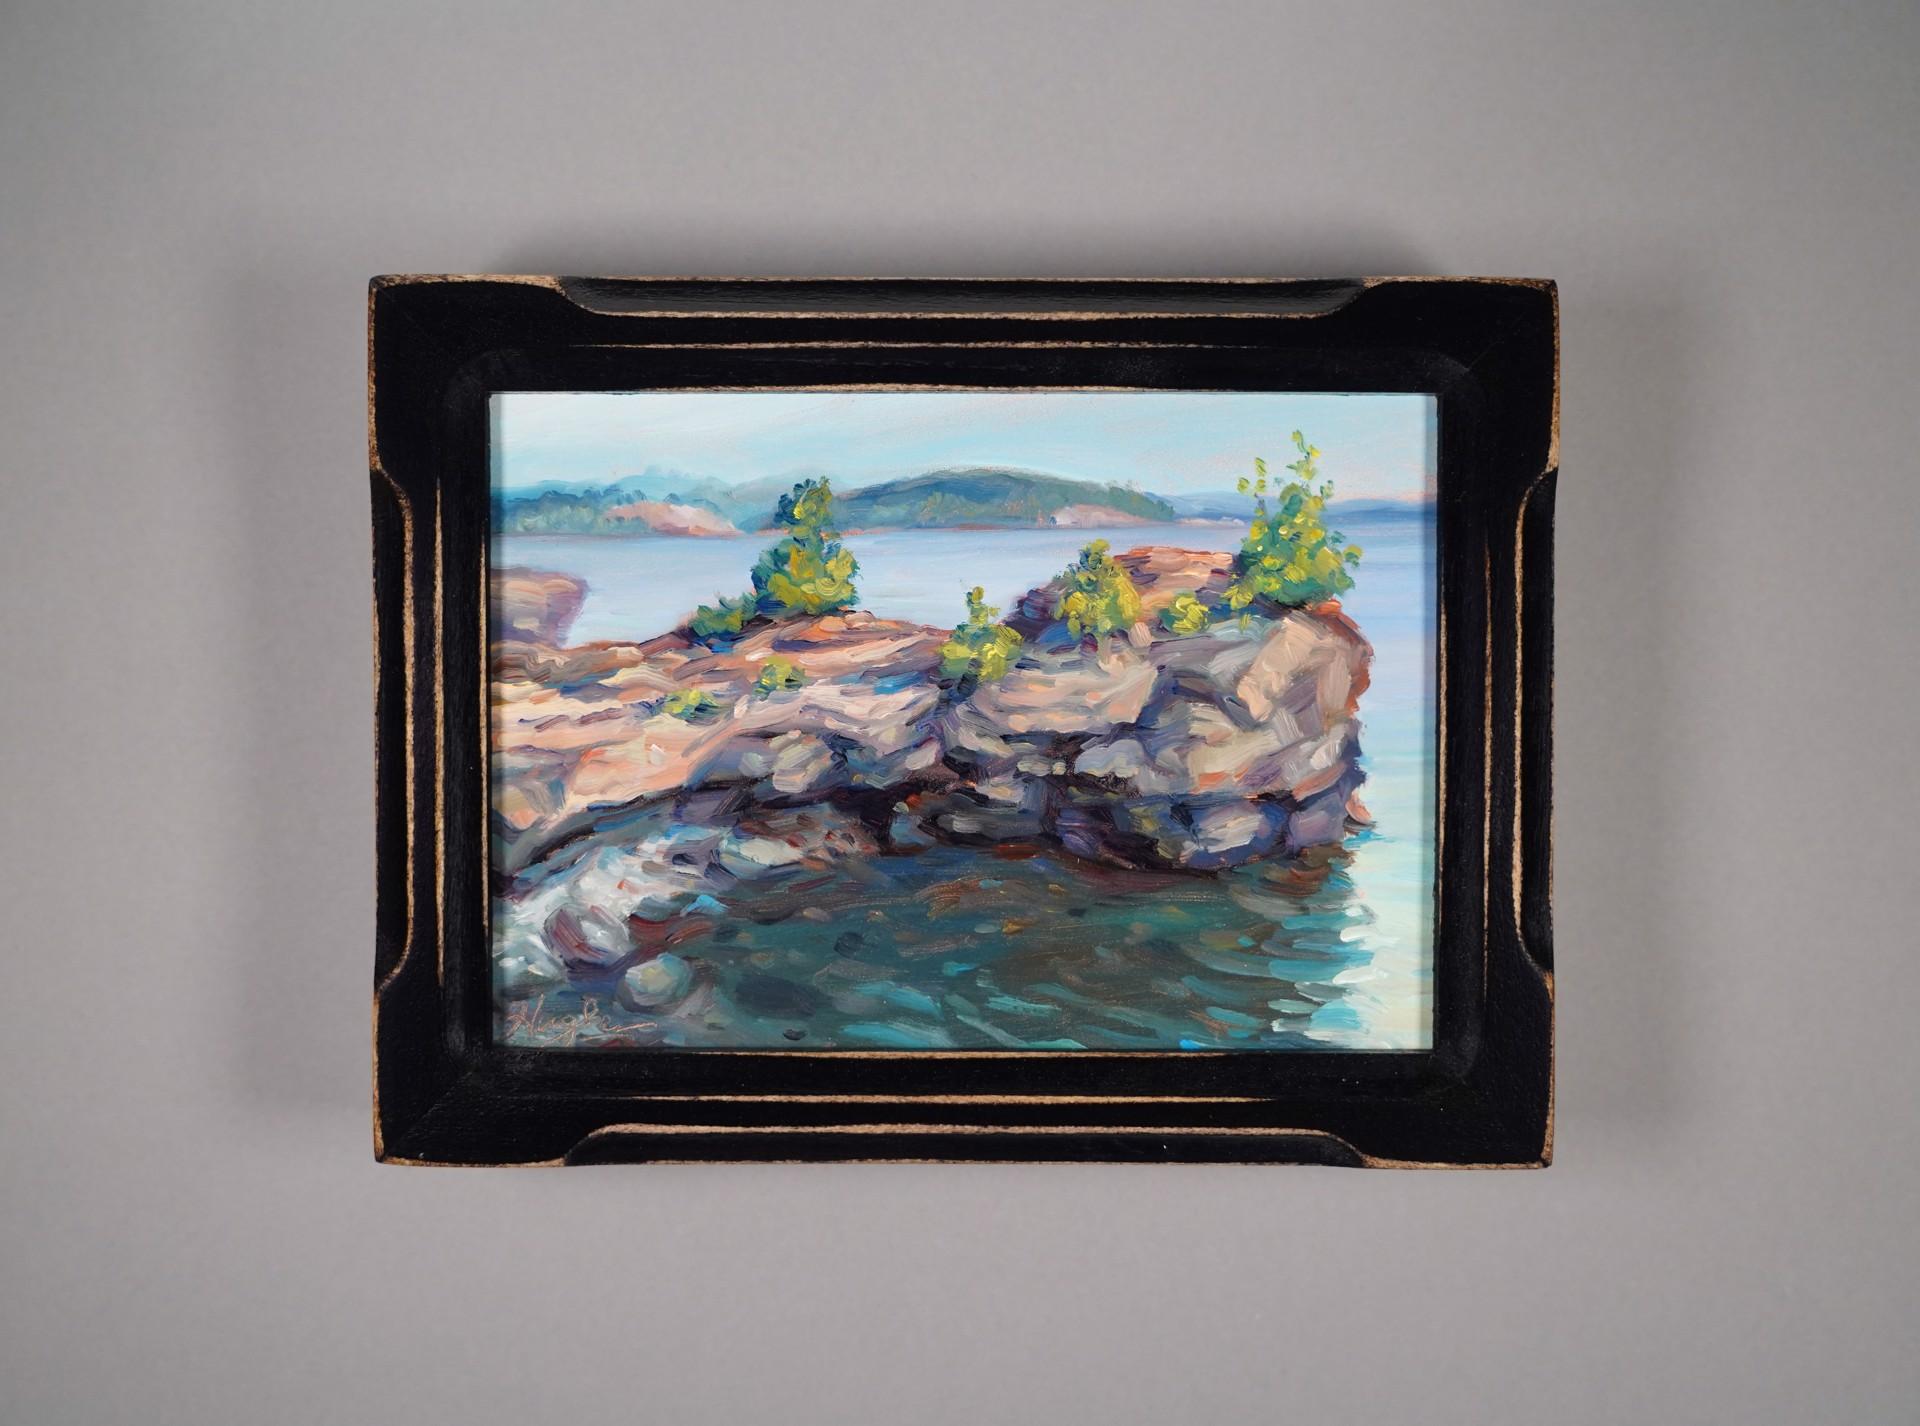 Presque Isle (Day 25) August 16 - Painting by Primary Hughes